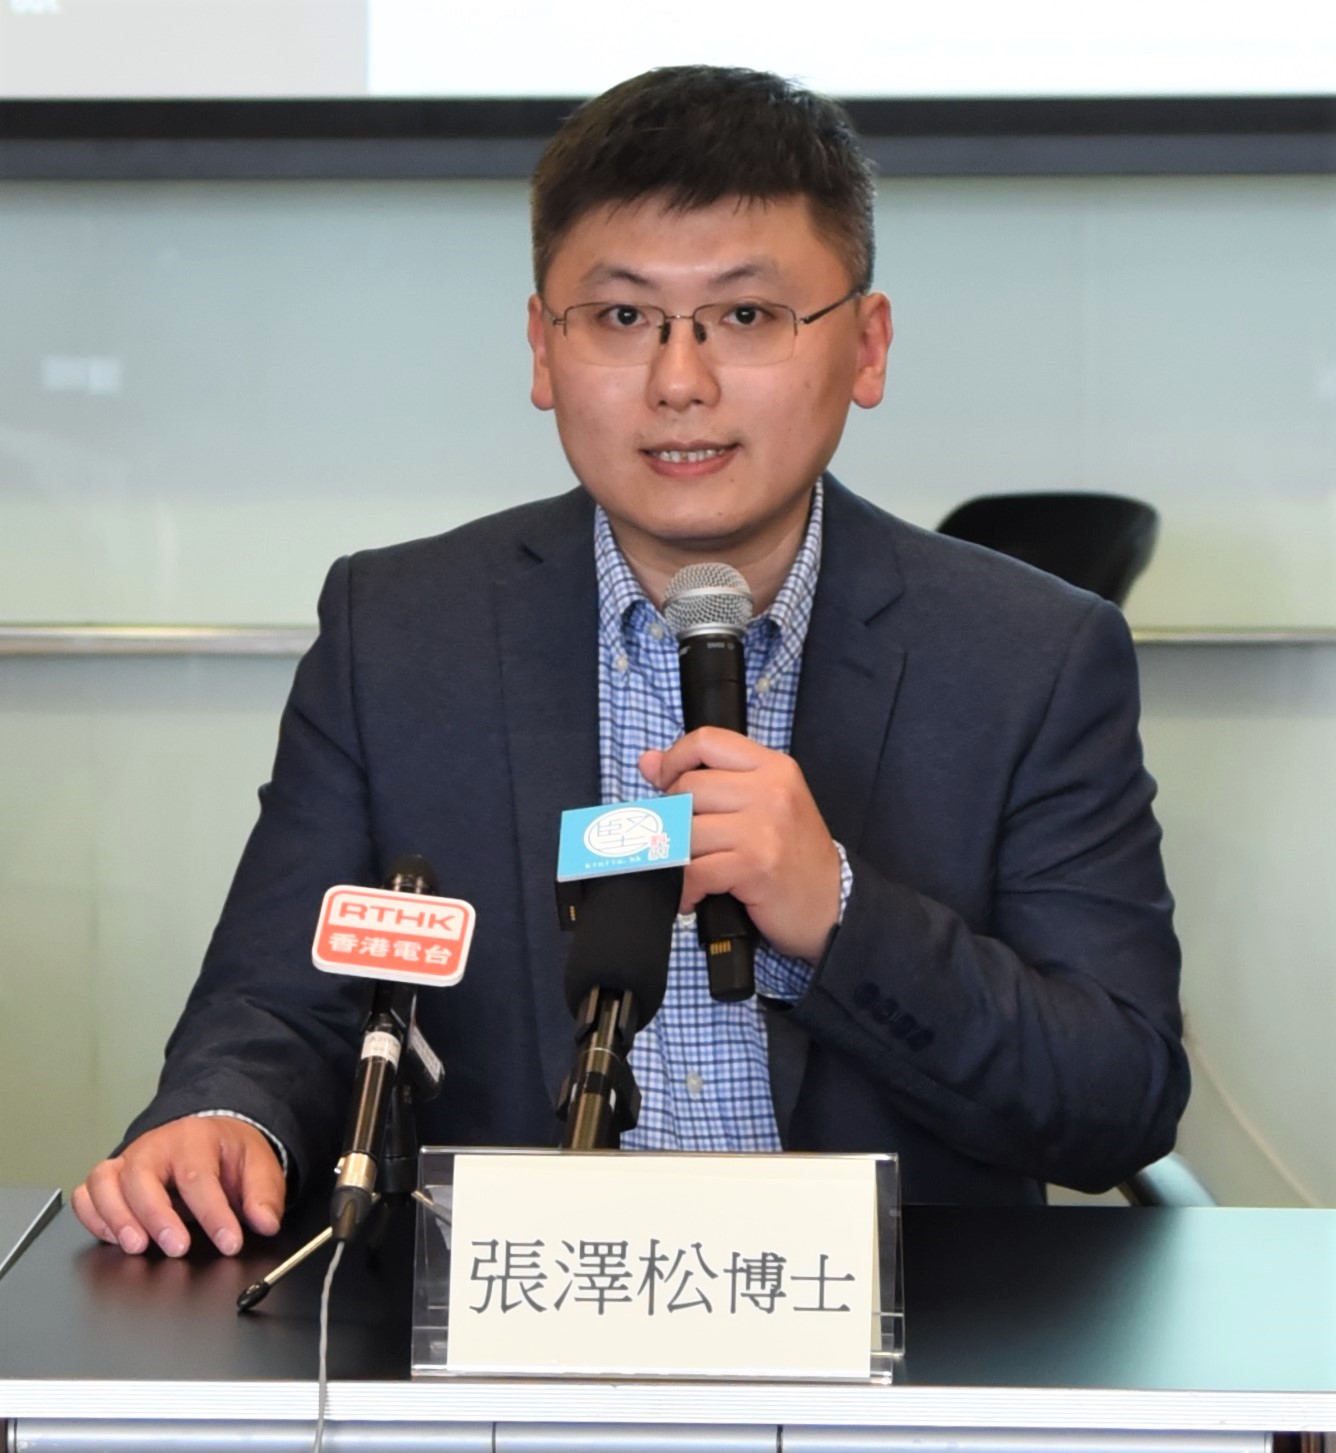 Dr. Ray C.C. Cheung, Chairman of the Hong Kong STEM Education Alliance, and Associate Professor of the Department of Electrical Engineering of the City University of Hong Kong